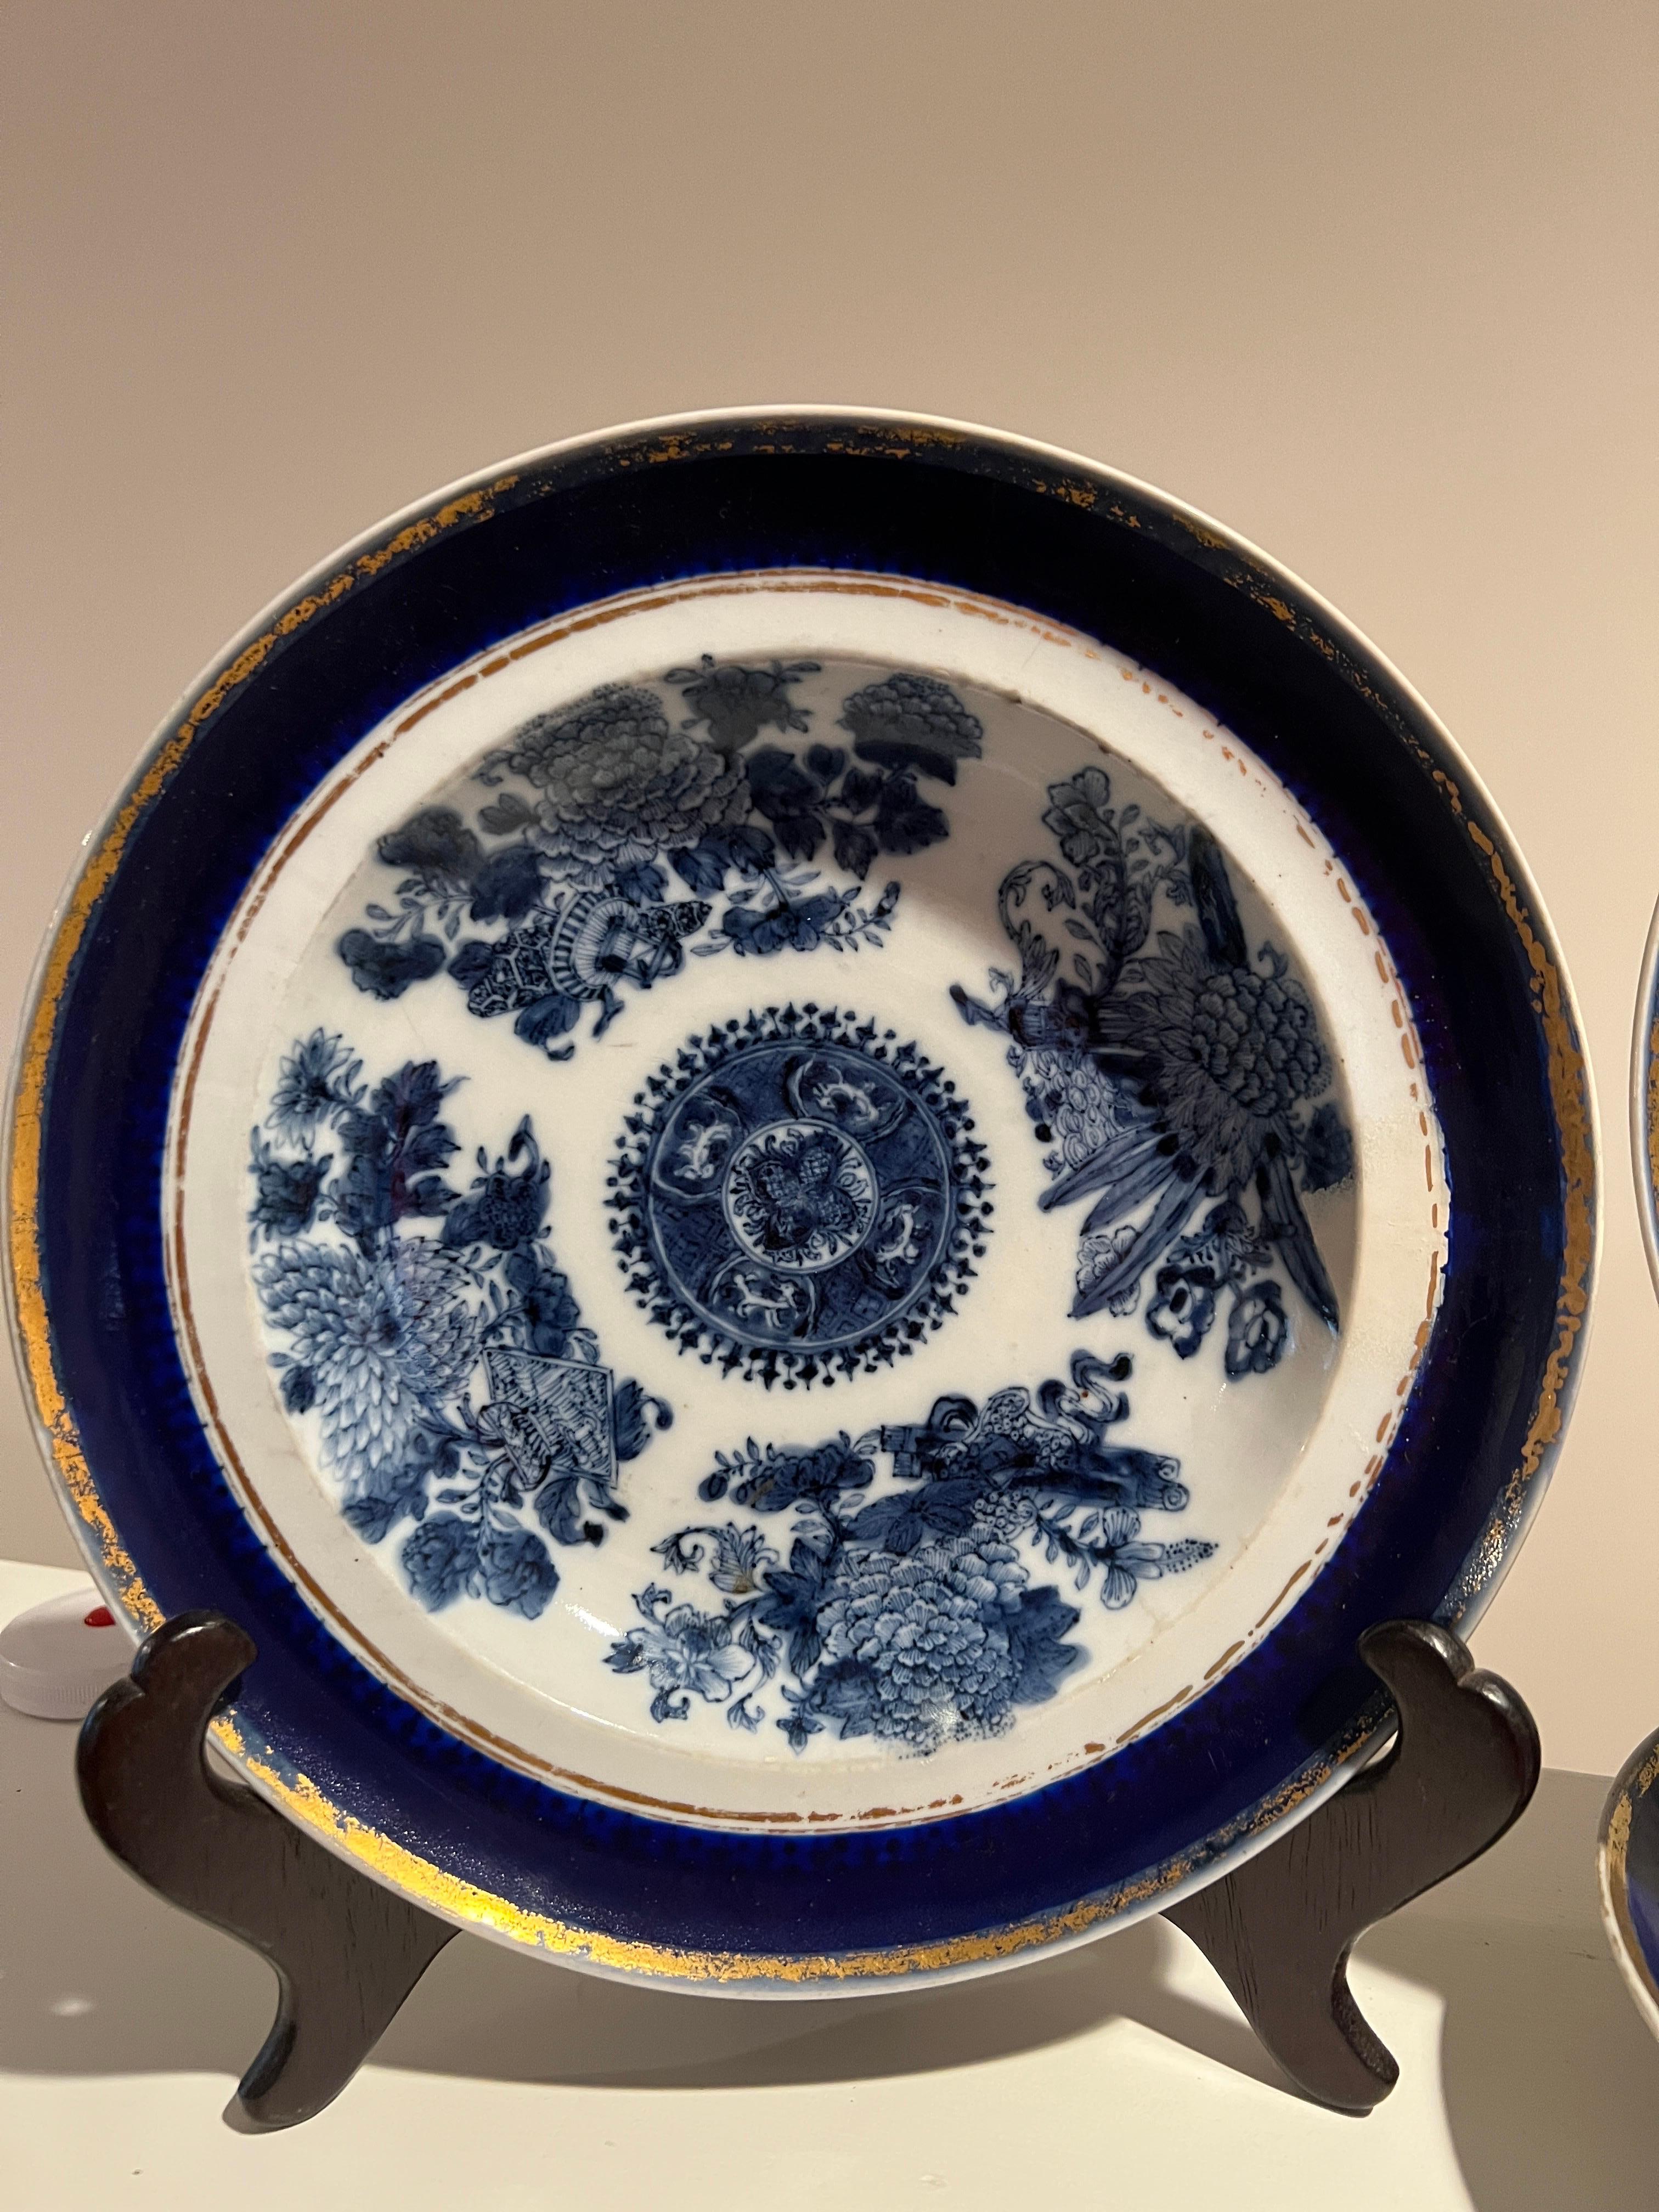 A set of 4 dinner plates - Chinese export porcelain for the American or European market in the famous 